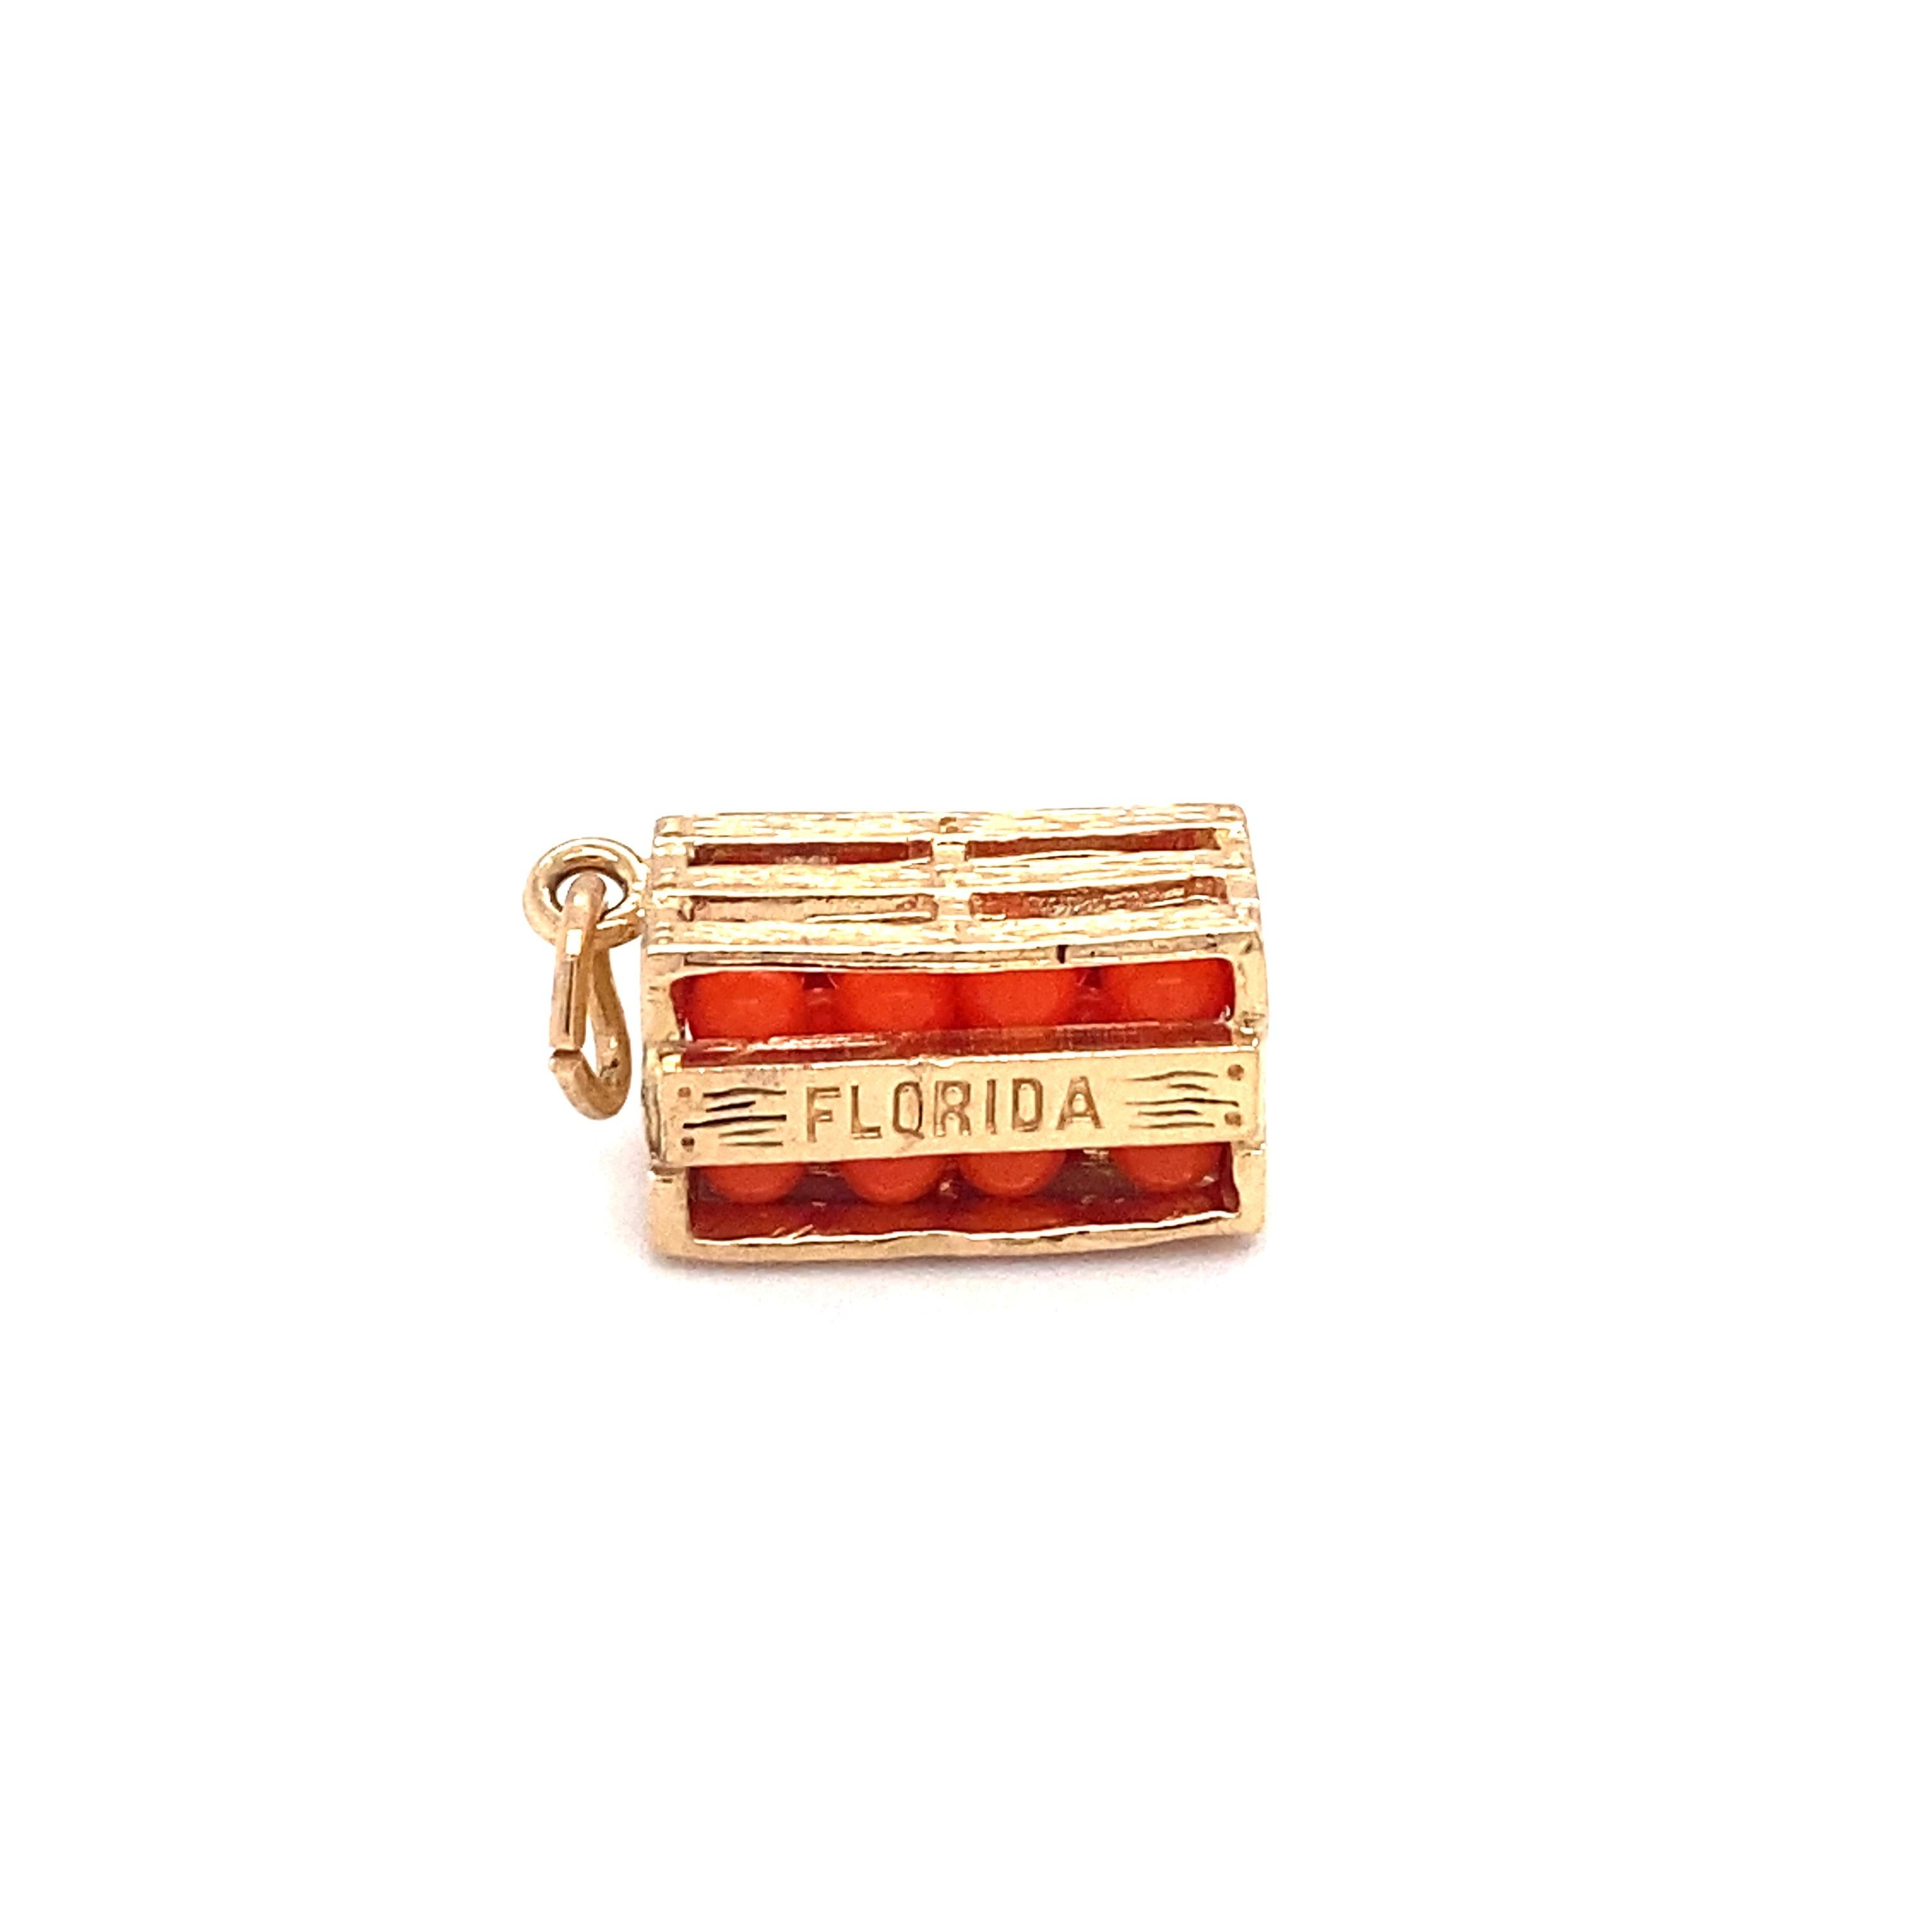 Circa: 1980s
Metal Type: 14k gold
Weight: 4.6g
Dimensions: 0.6in L